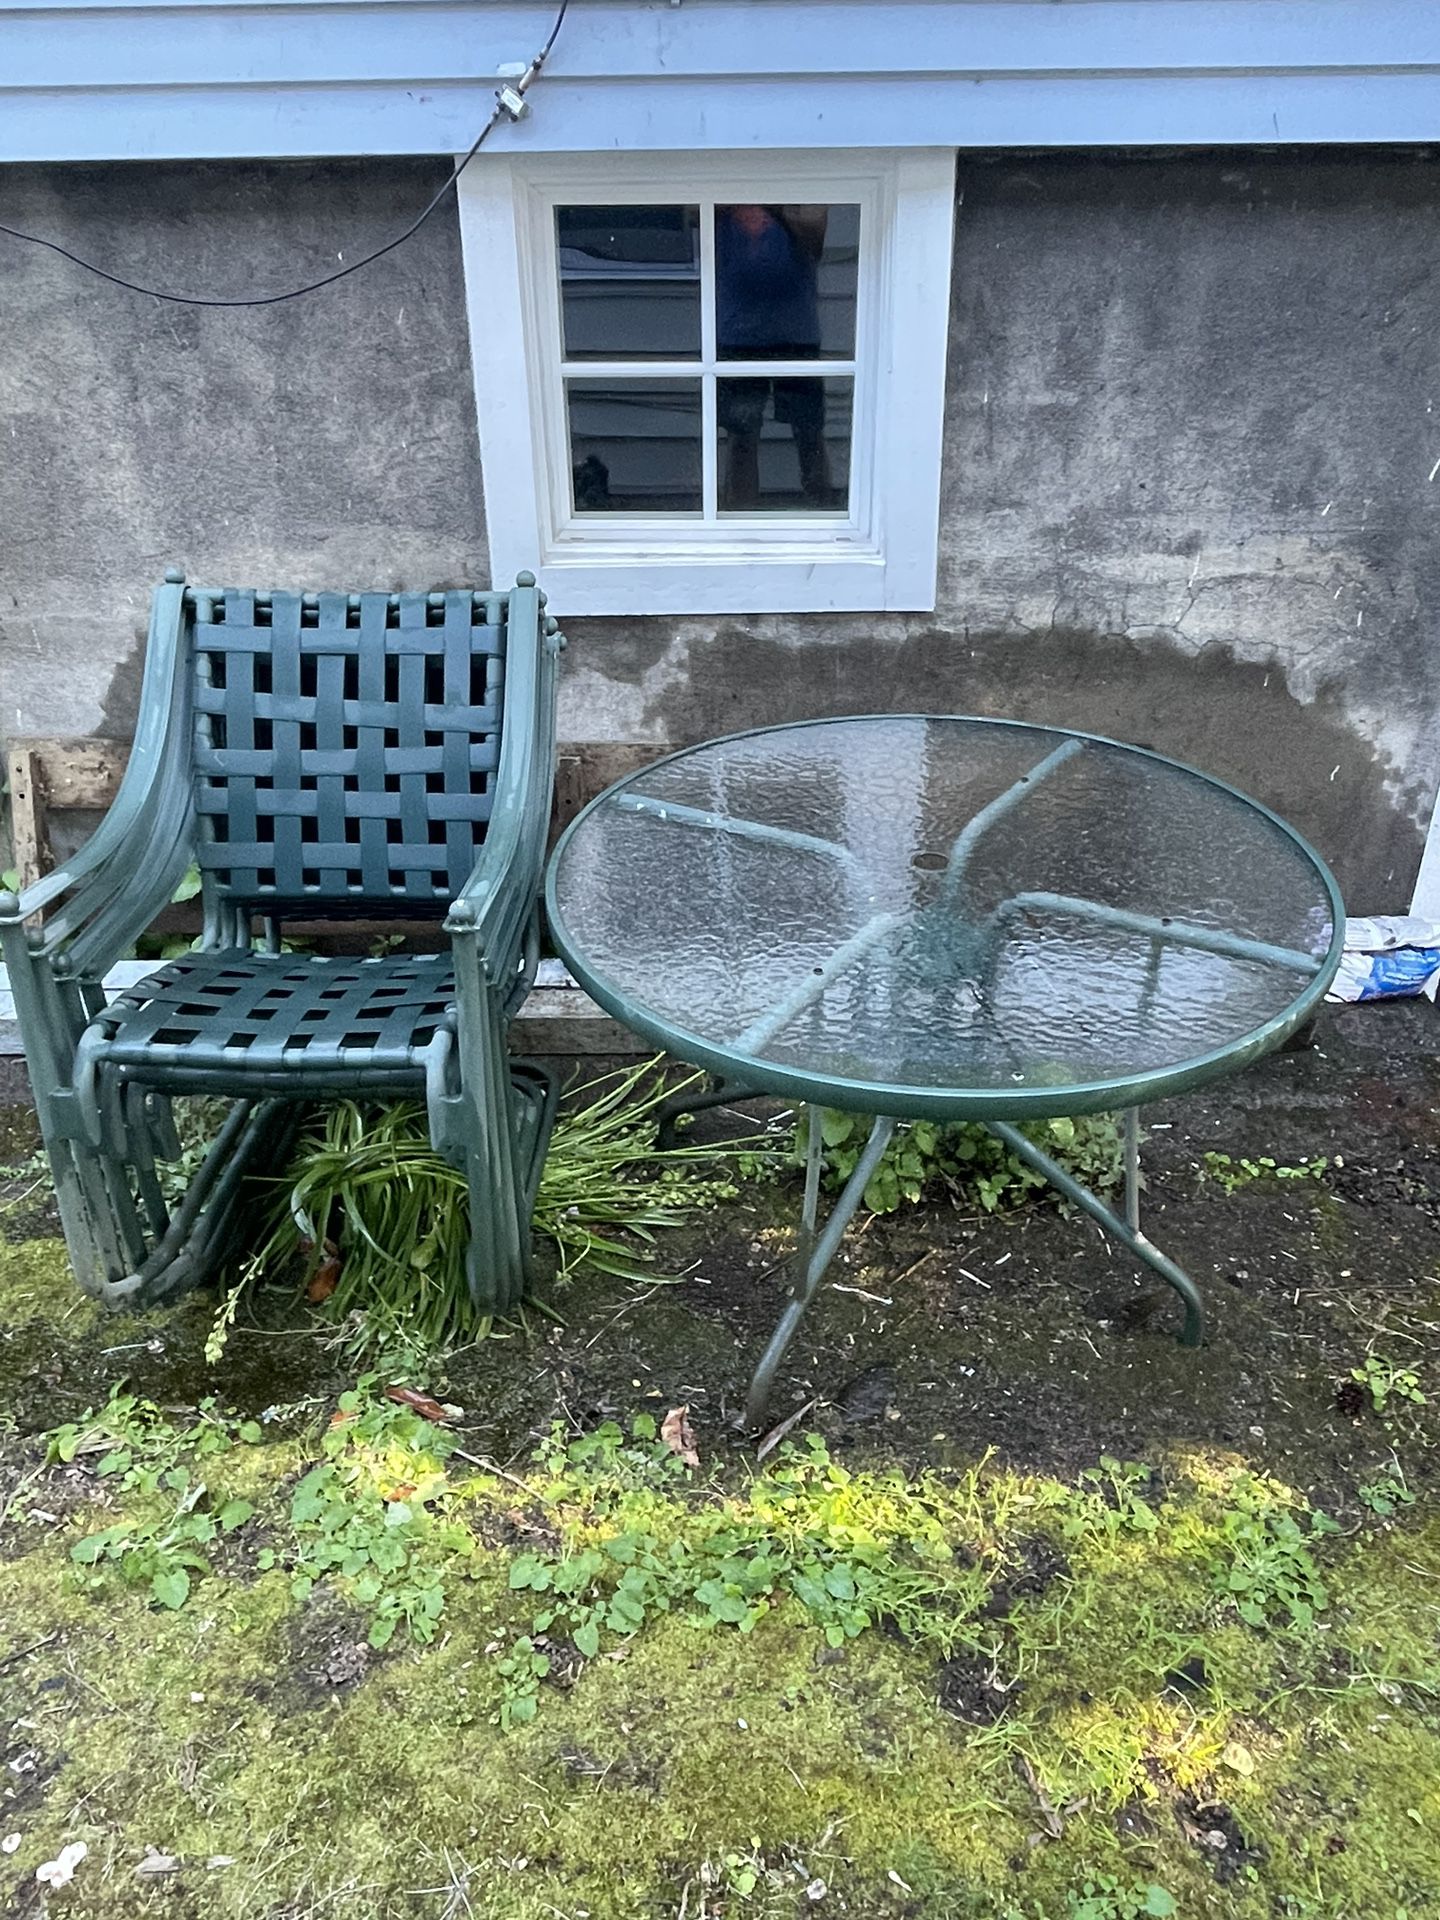 42” Round Glass Patio Table & 4 Chairs